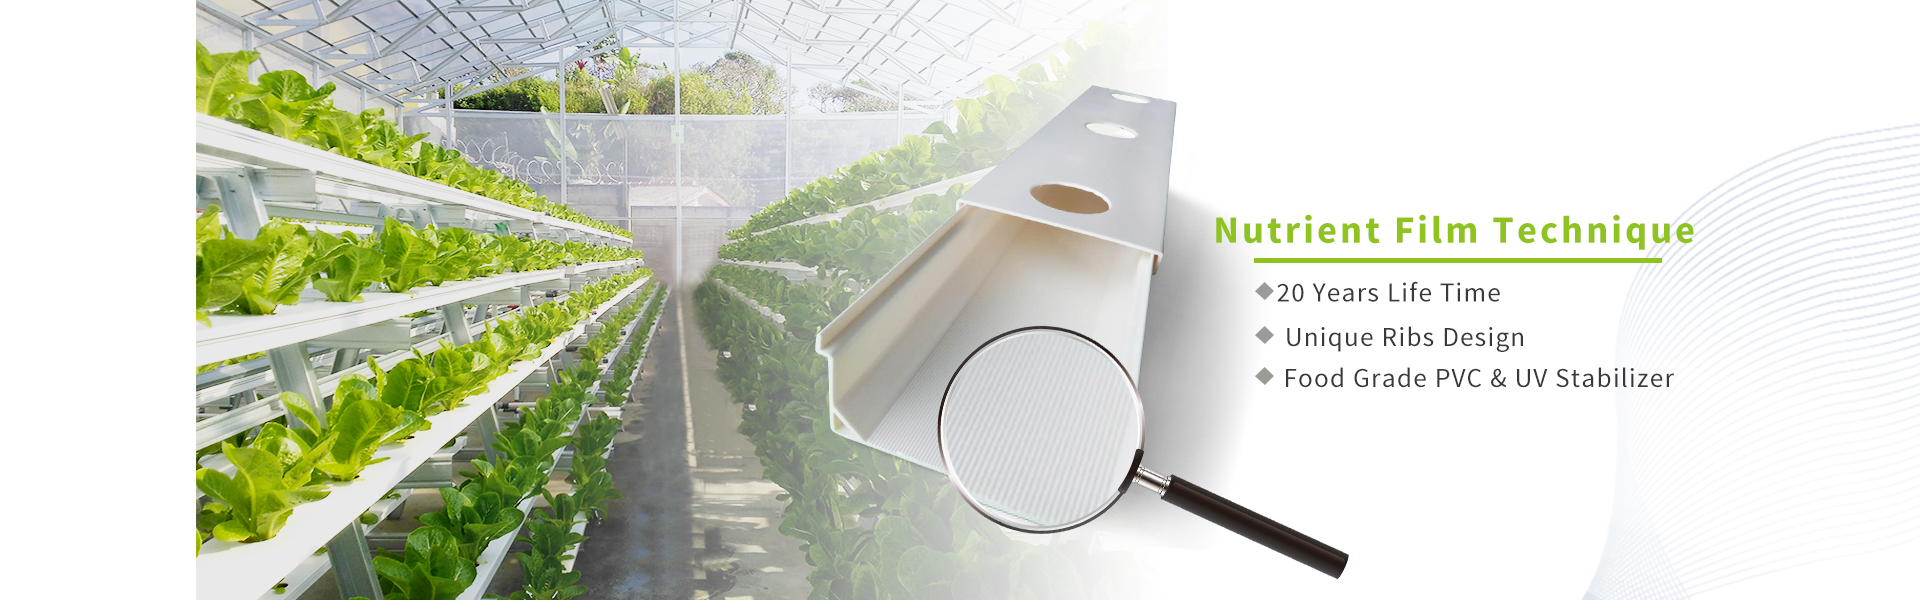 Hydroponic NFT Growing System